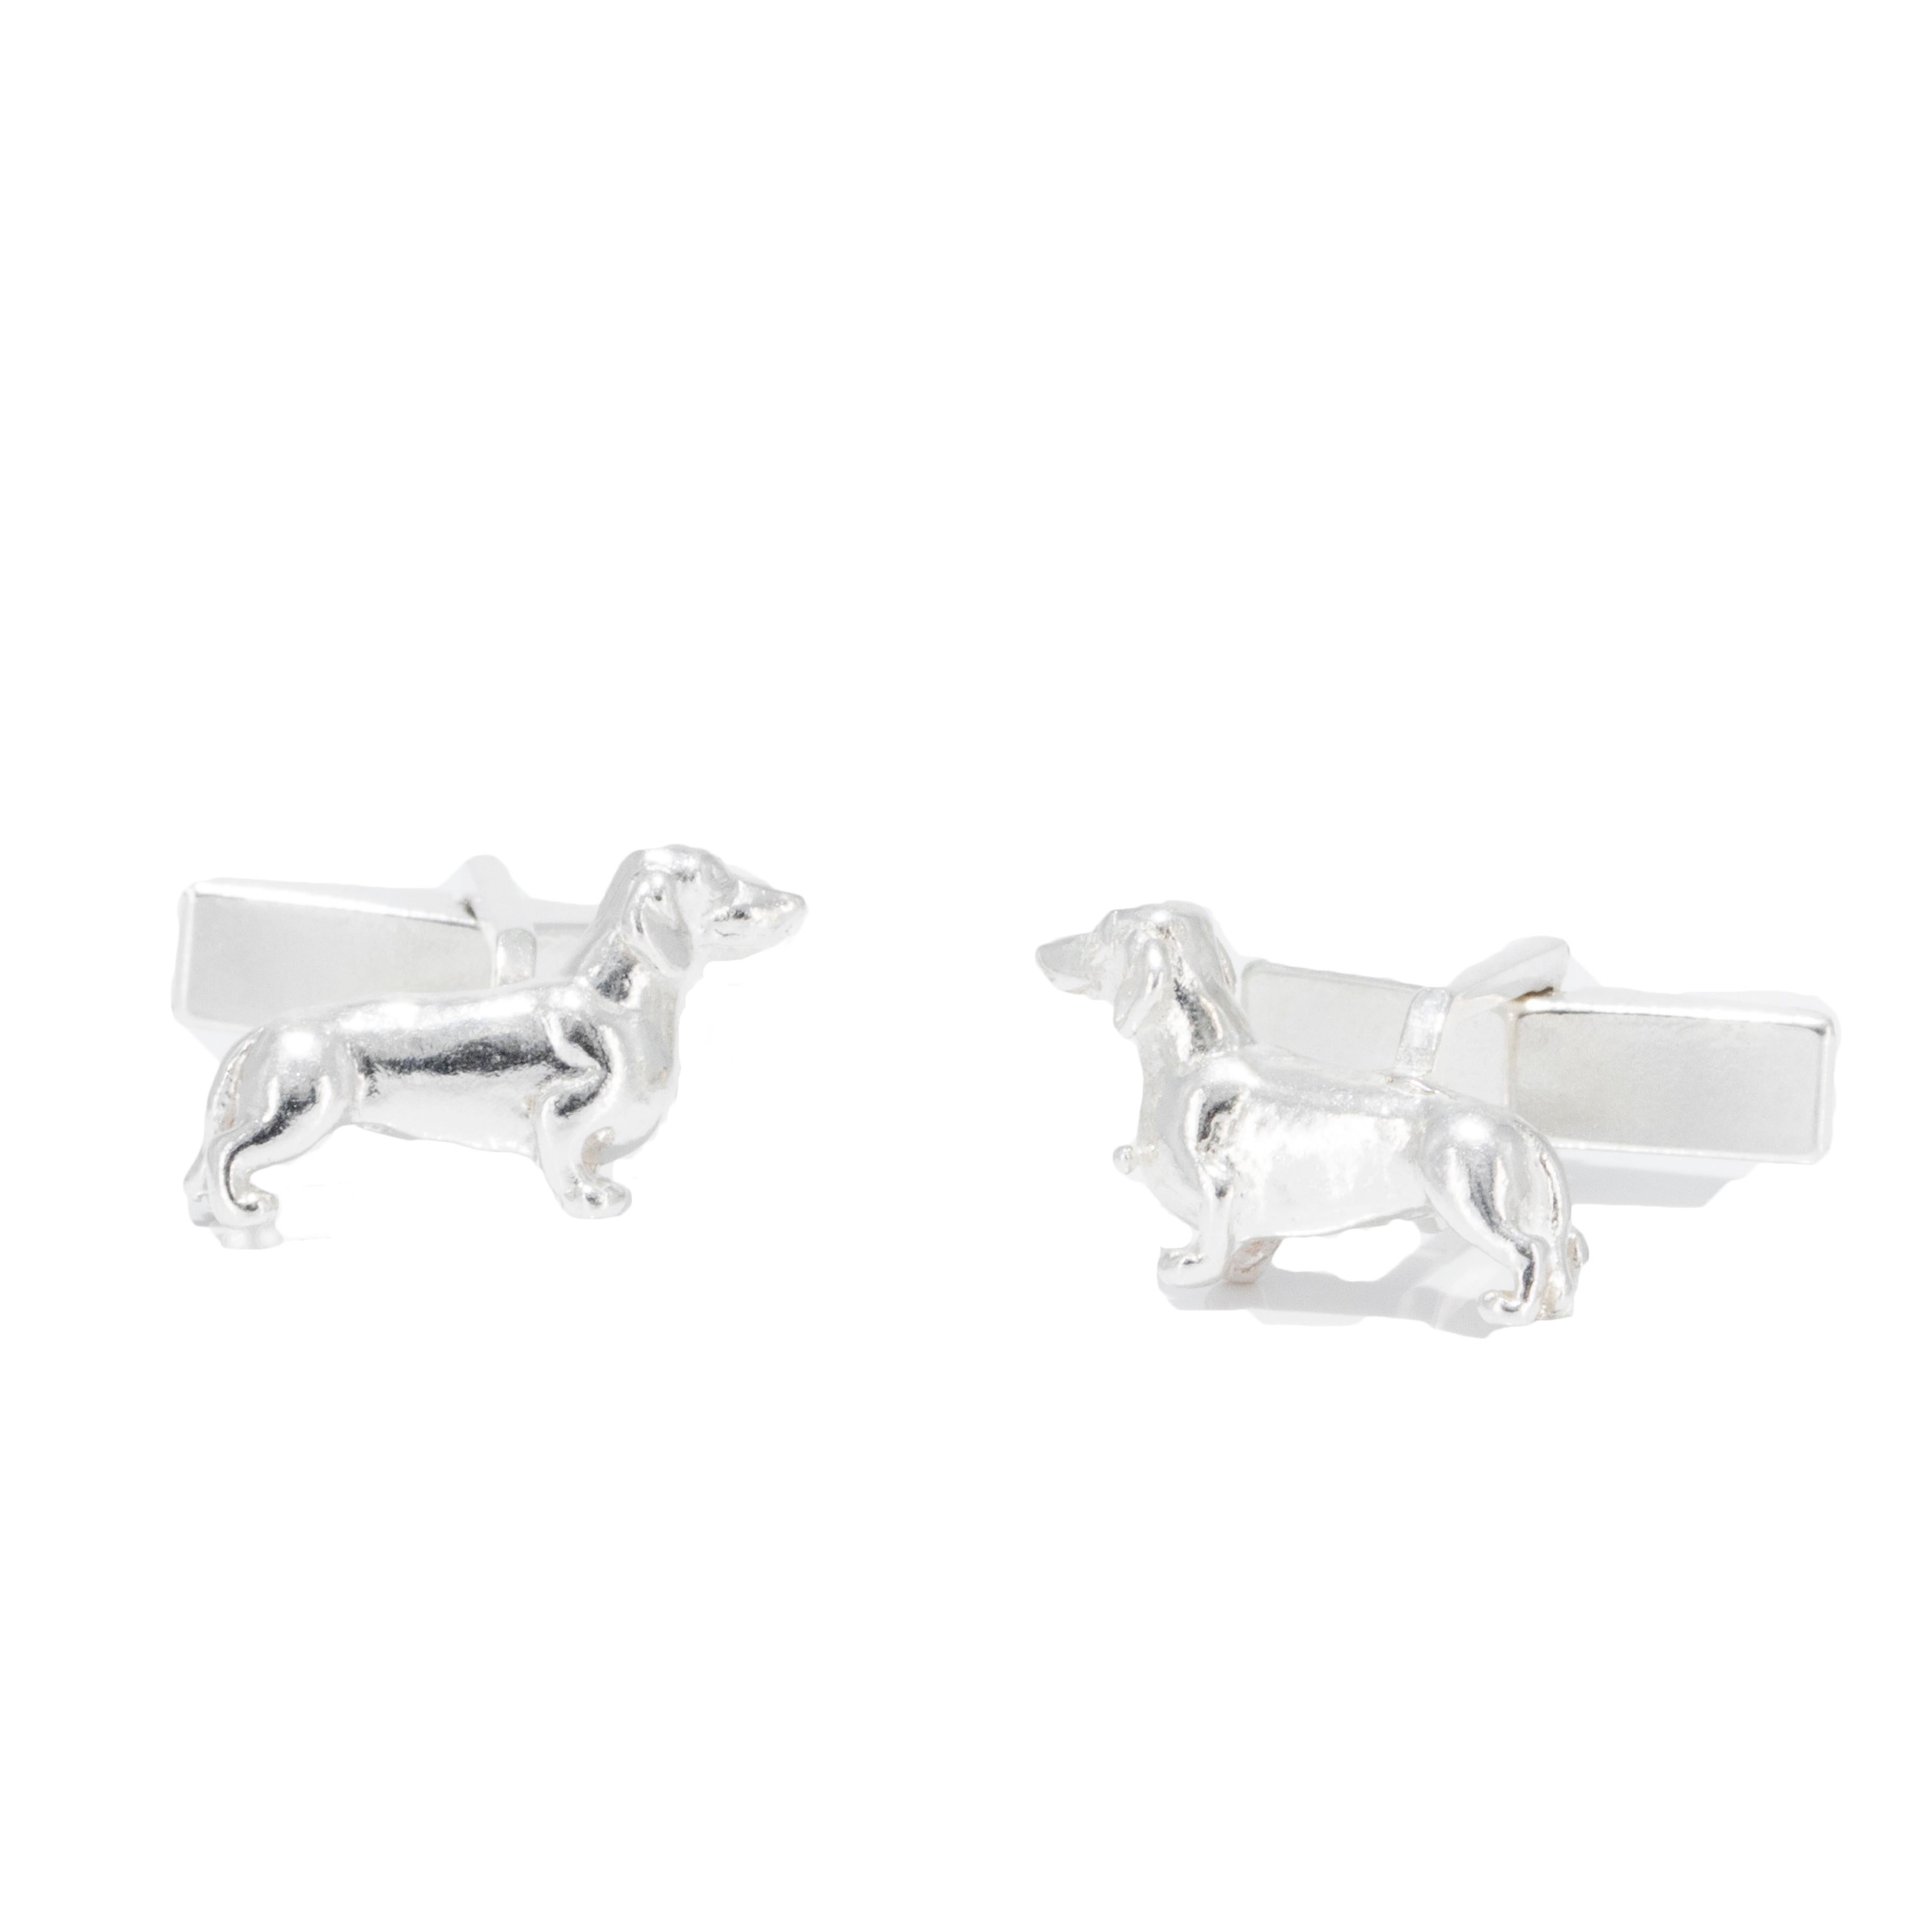 Contemporary Dachshund Cufflinks in Sterling Silver For Sale